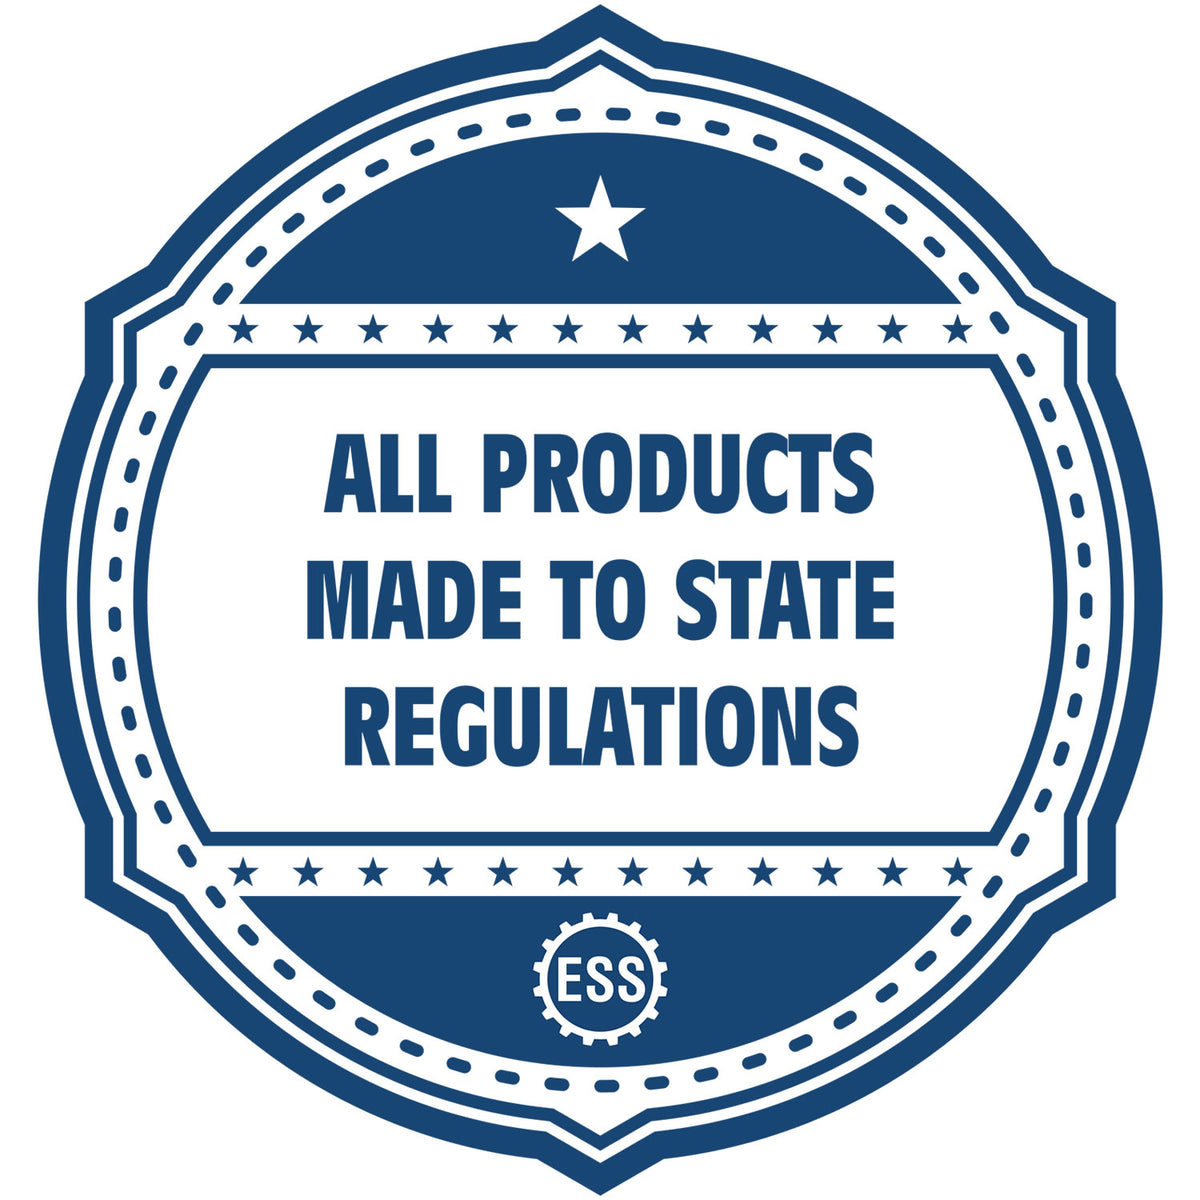 A blue icon or badge for the Slim Pre-Inked Kentucky Professional Geologist Seal Stamp showing that this product is made in compliance with state regulations.